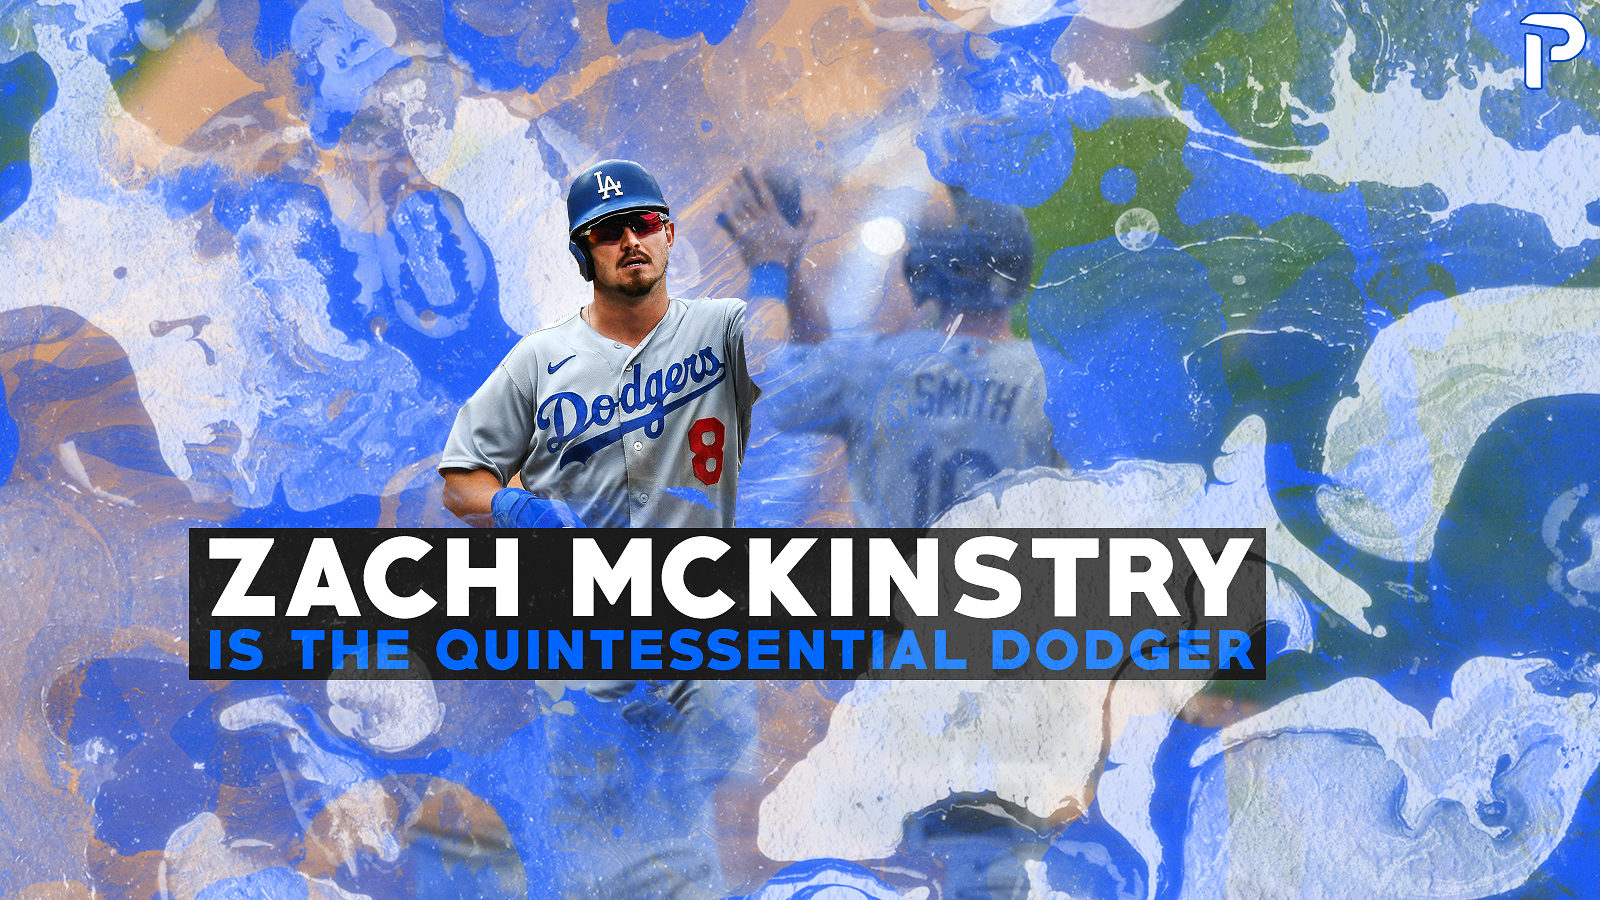 Zach McKinstry is the Quintessential Dodger